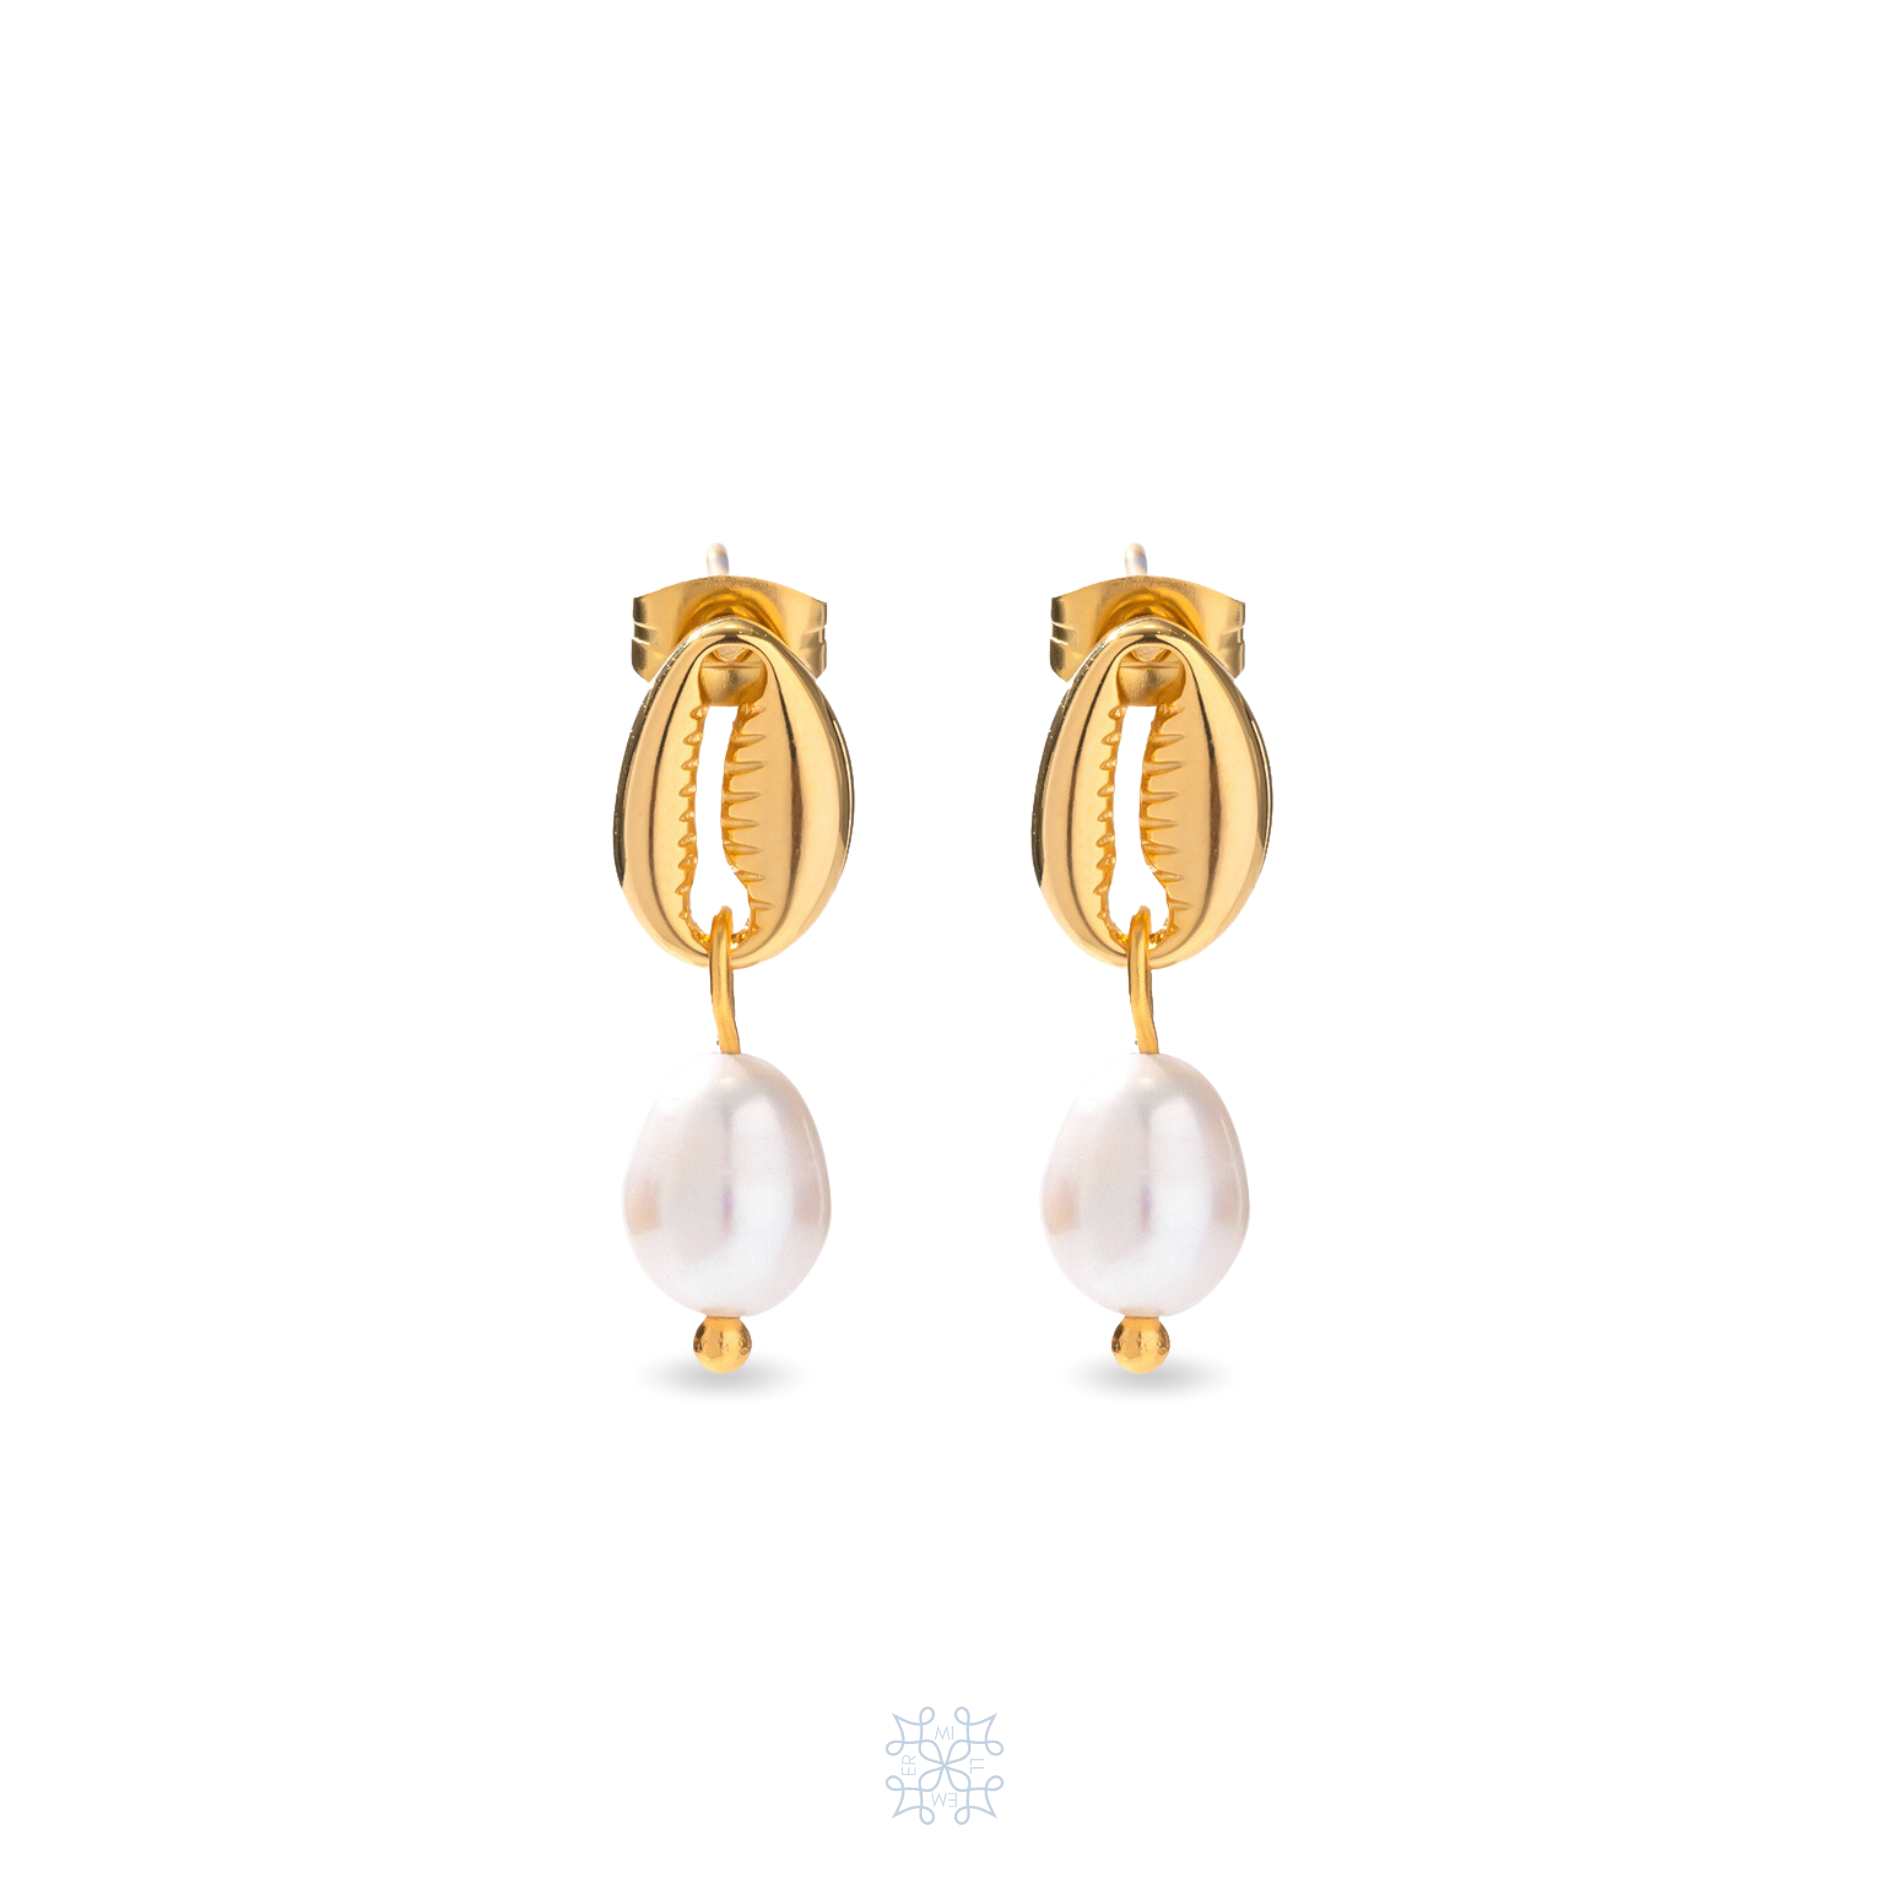 Drop Earrings with the top part is the shape of a gold shell and the drop part is a white pearl attached to the shell. Shell Pearl Gold Drop Earrings